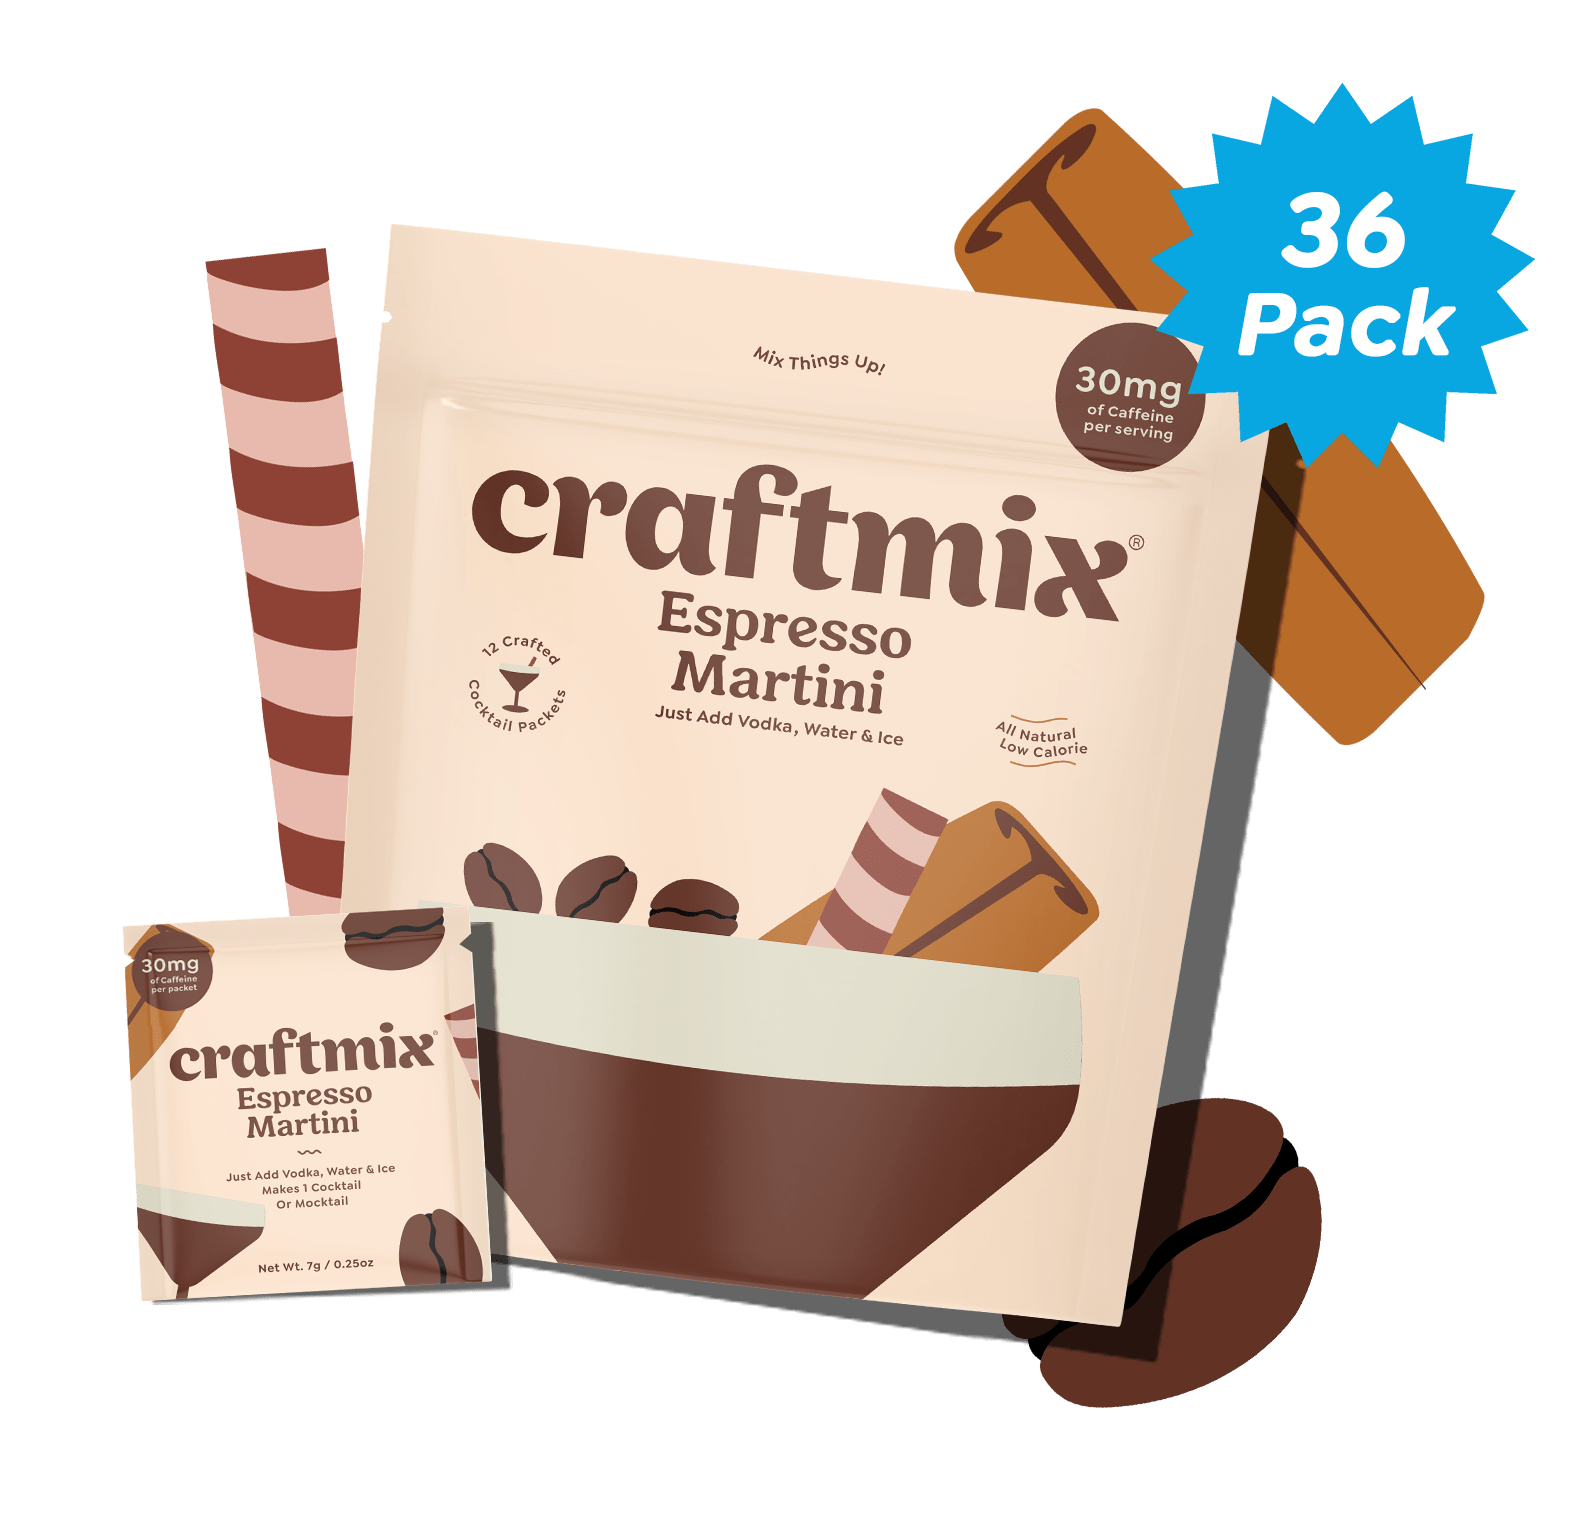 Craftmix Cocktail Packet Strawberry Mule